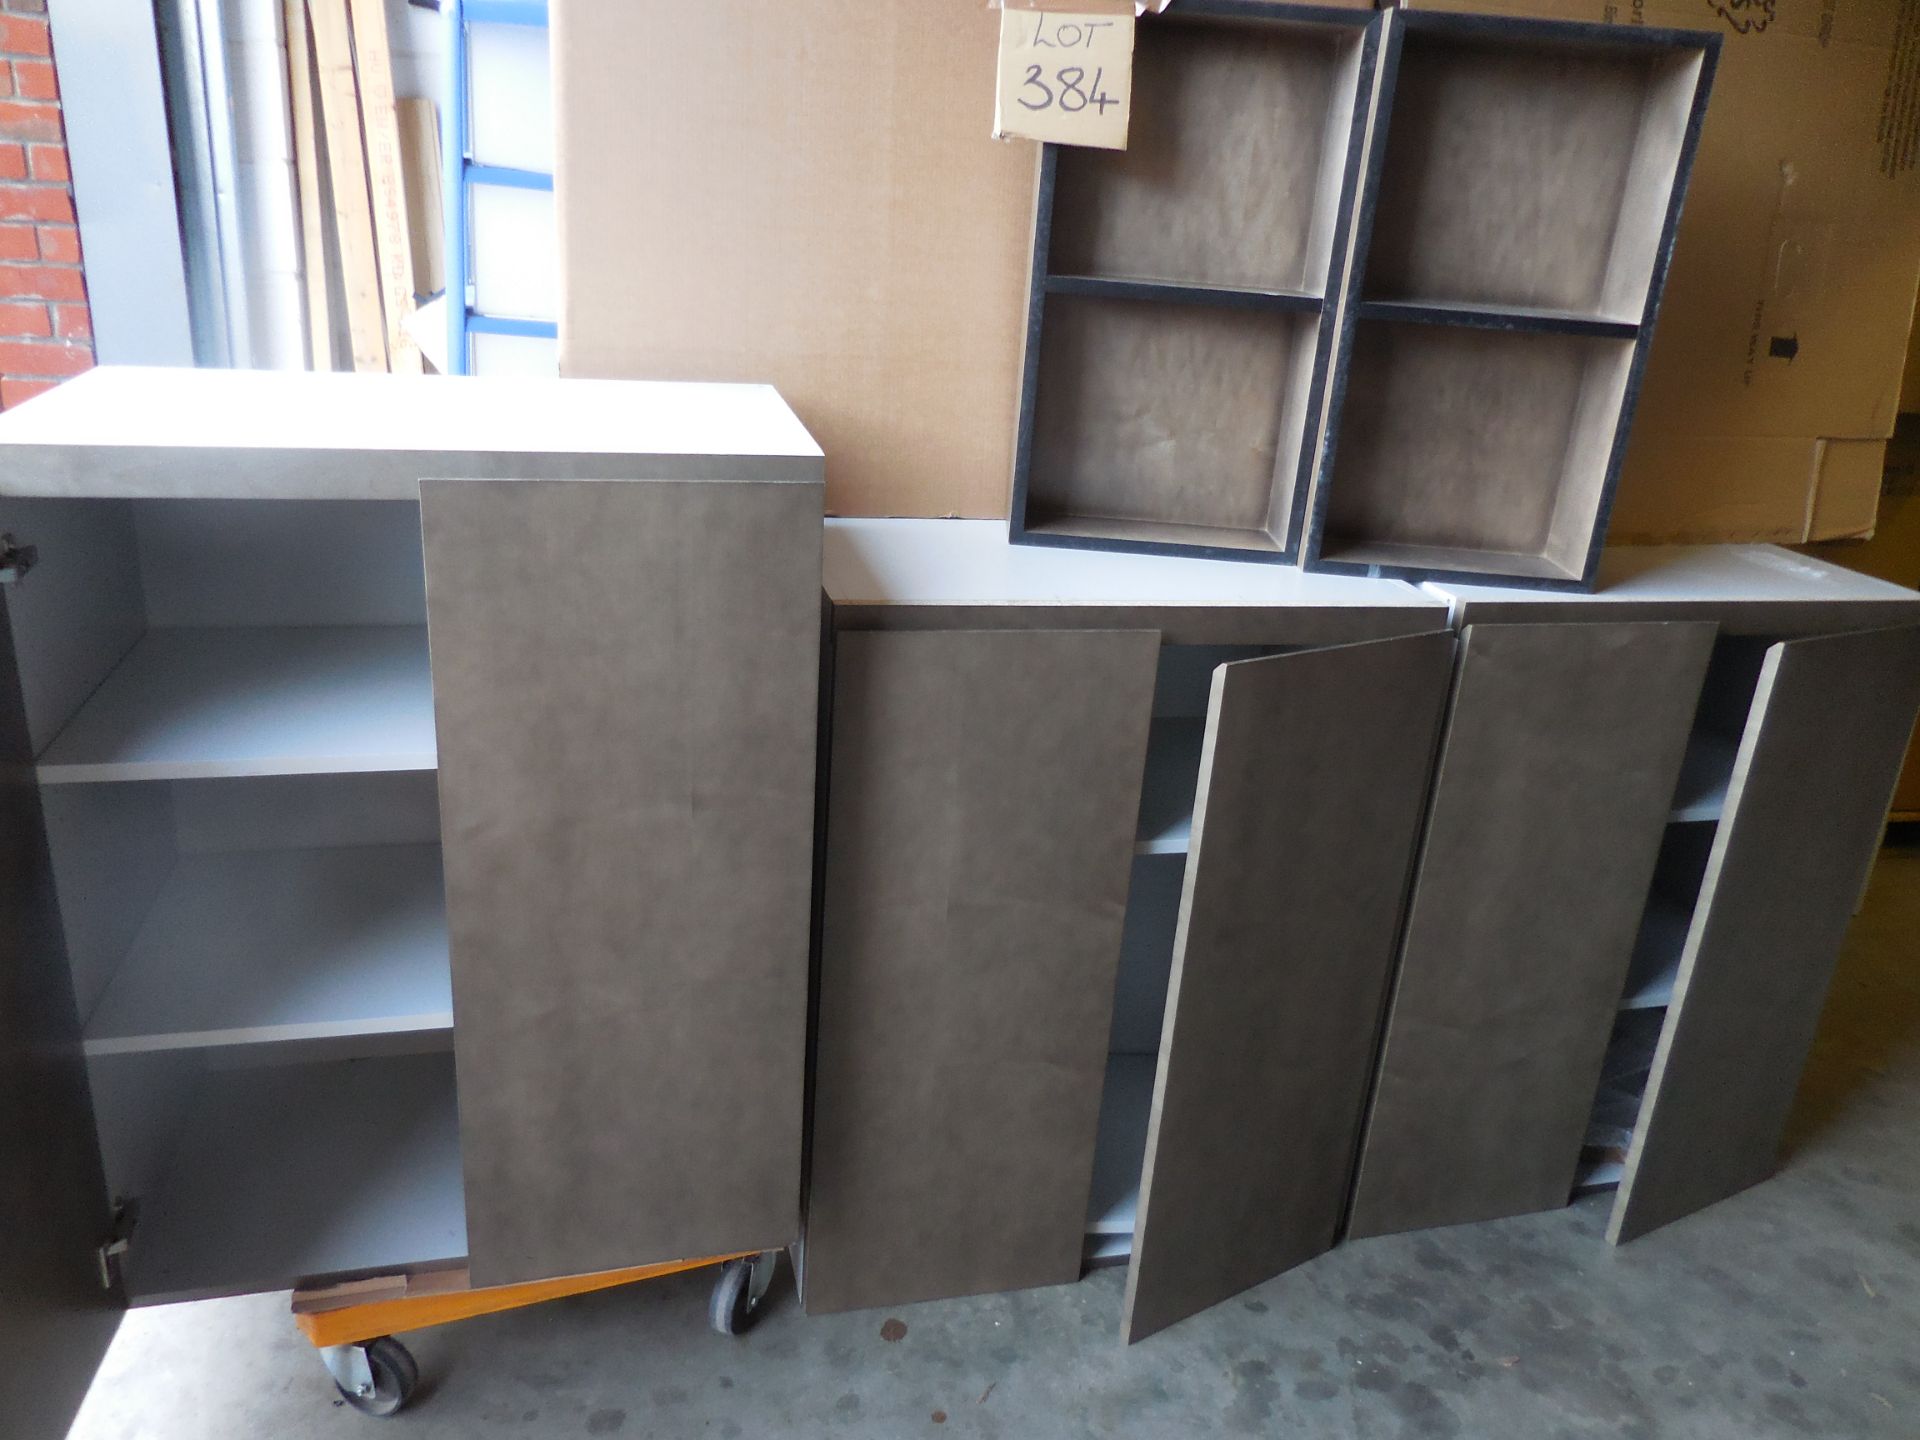 5 Cabinets. 3 Cabinets Approx Sizes Are 1015Cm High,Width 805Cm,Depth 490Cm,2 Cabinets (As